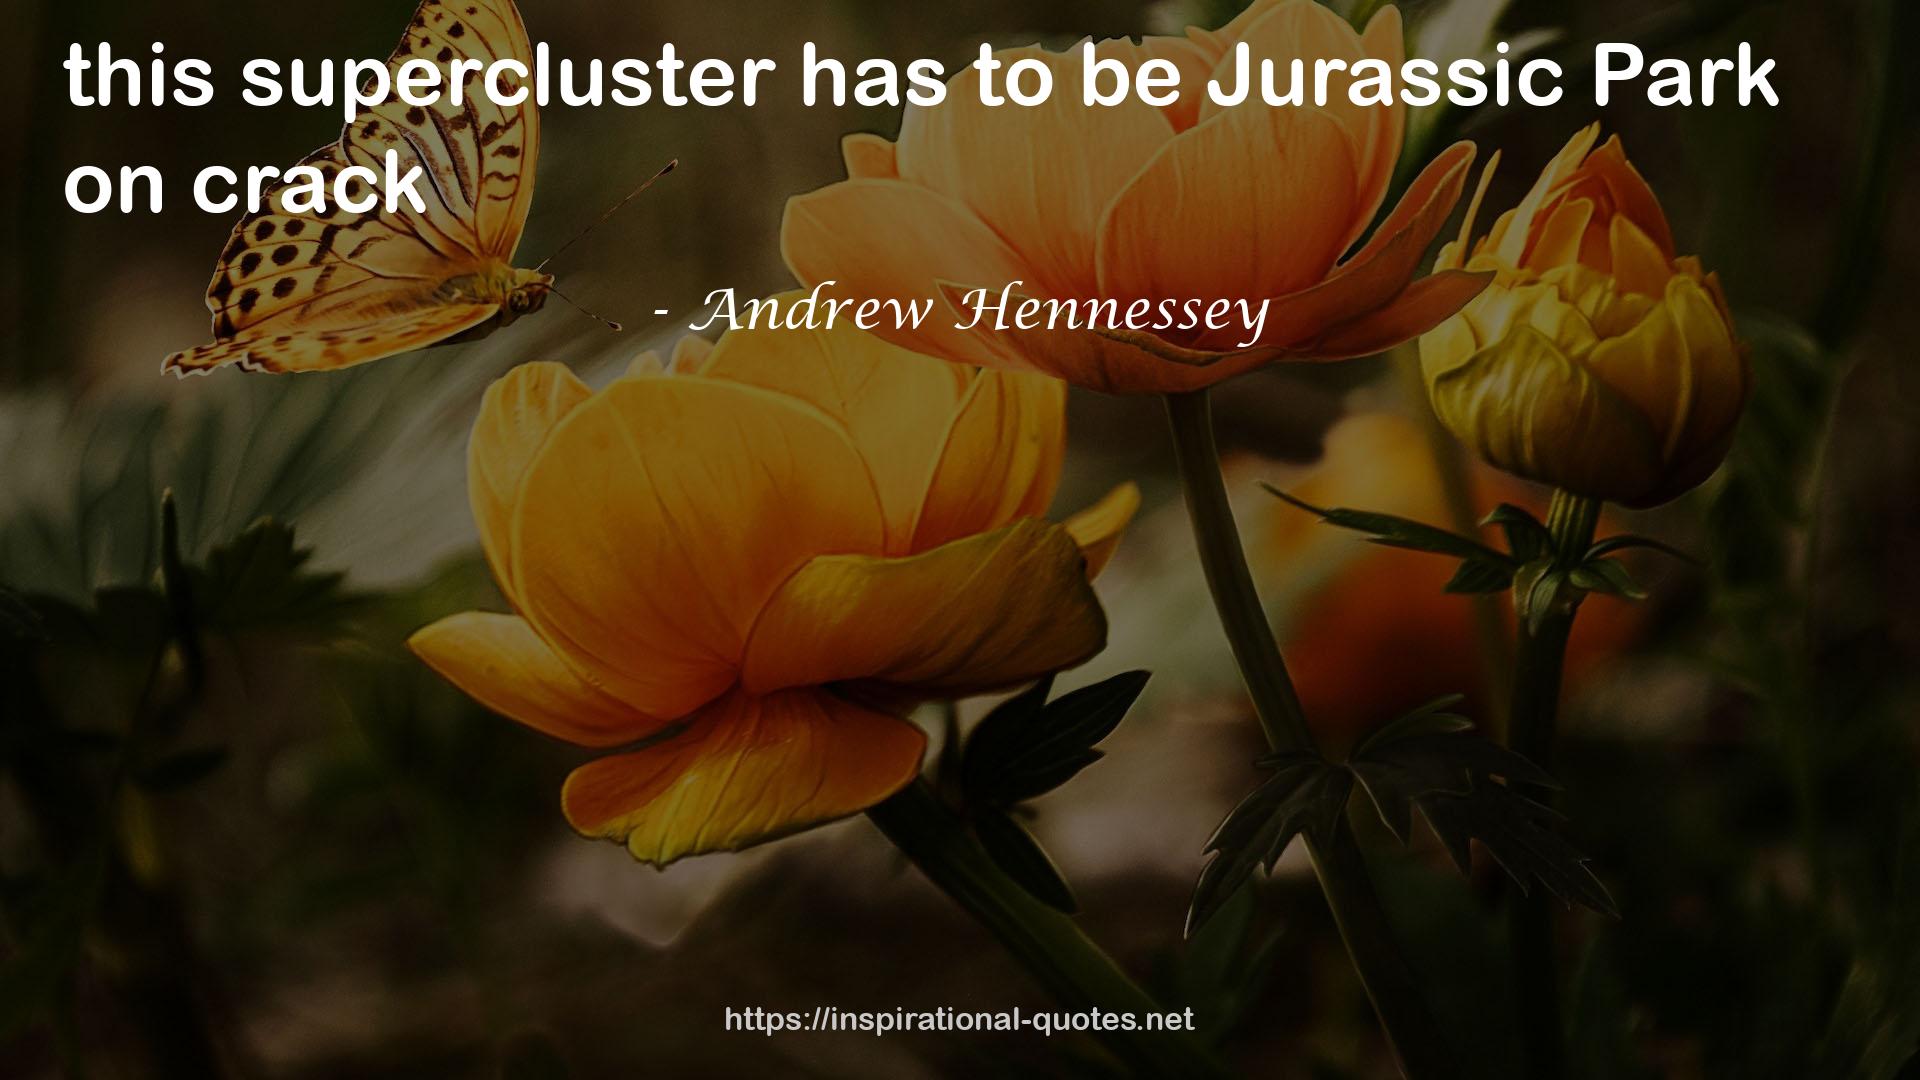 Andrew Hennessey QUOTES